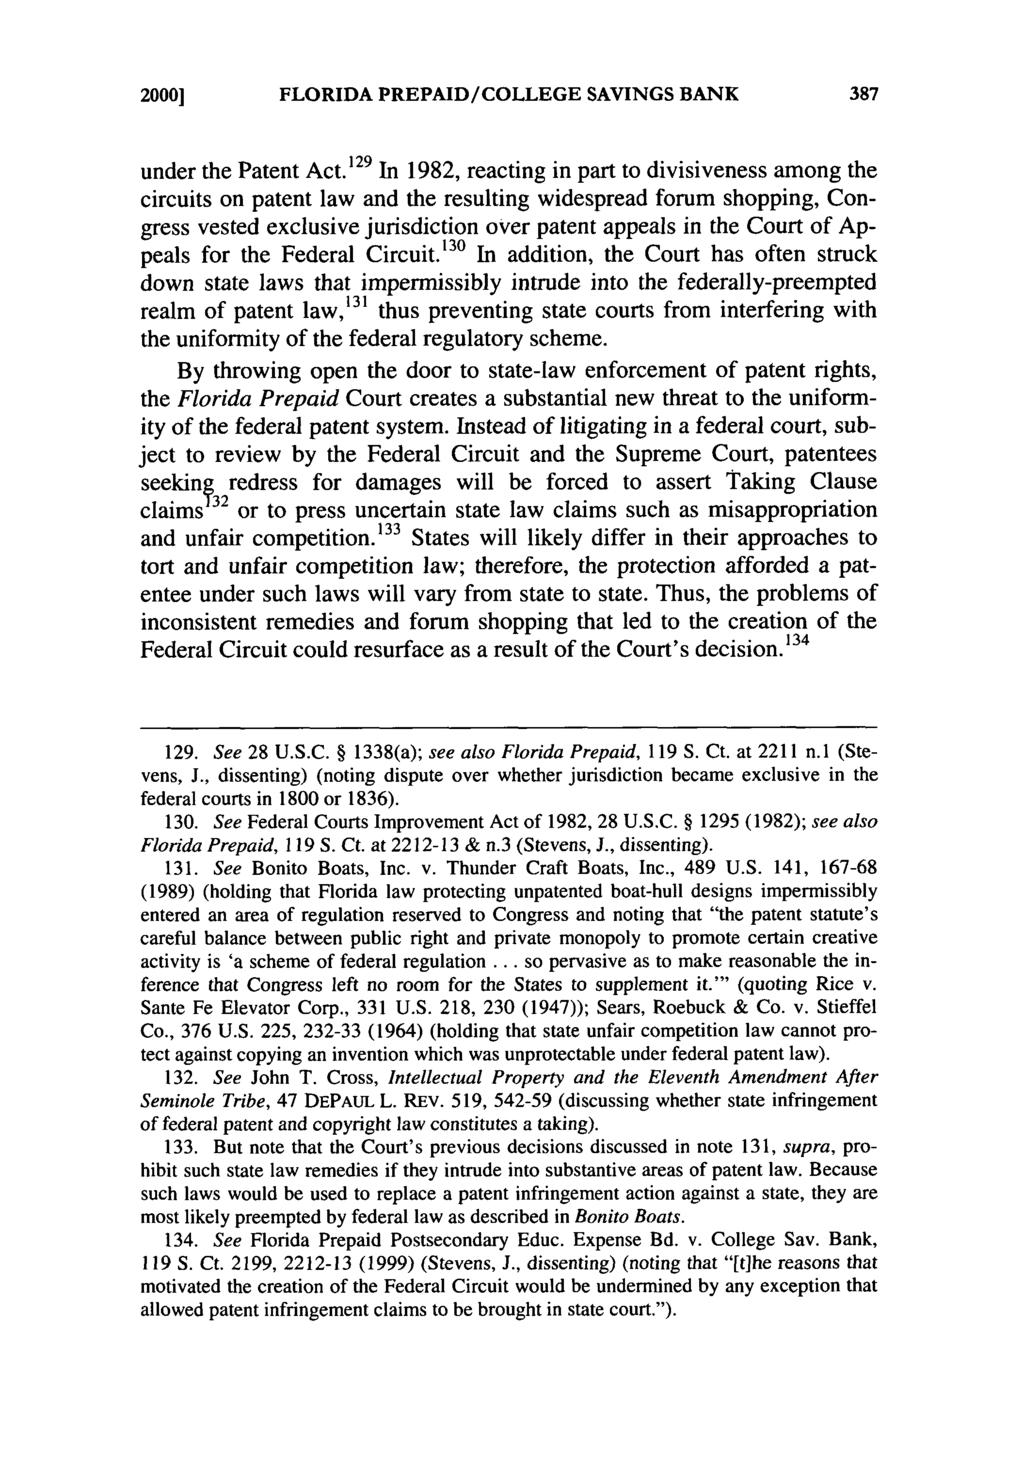 20001 FLORIDA PREPAID/COLLEGE SAVINGS BANK under the Patent Act.